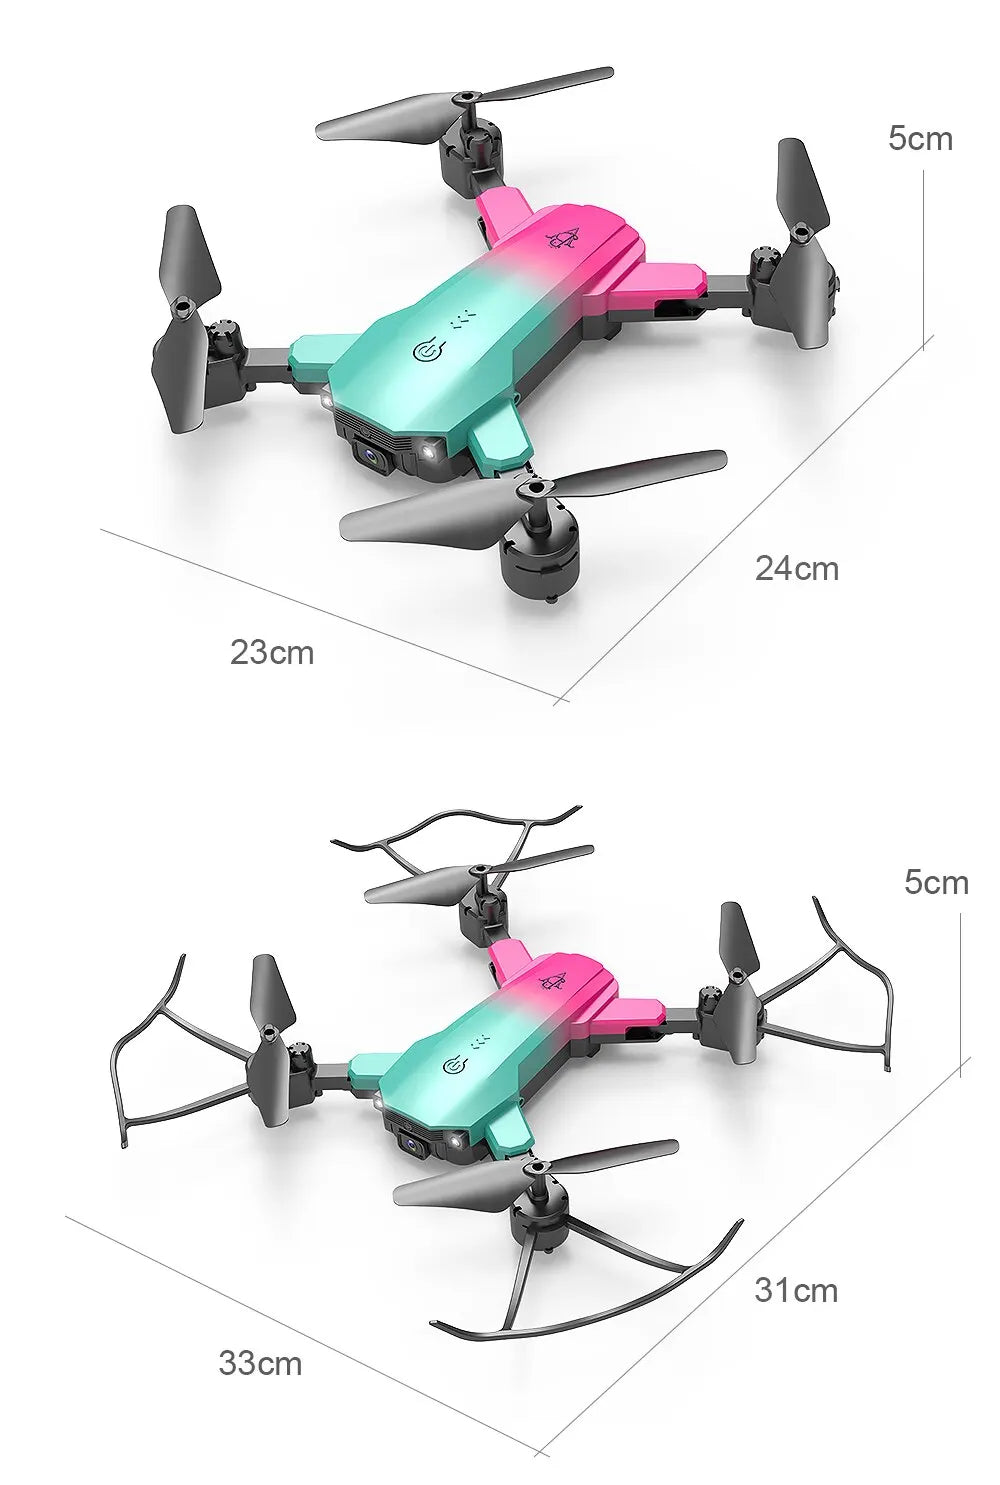 S29 Drone, UAV has the function of constant altitude maintenance mode, infrared four-sided